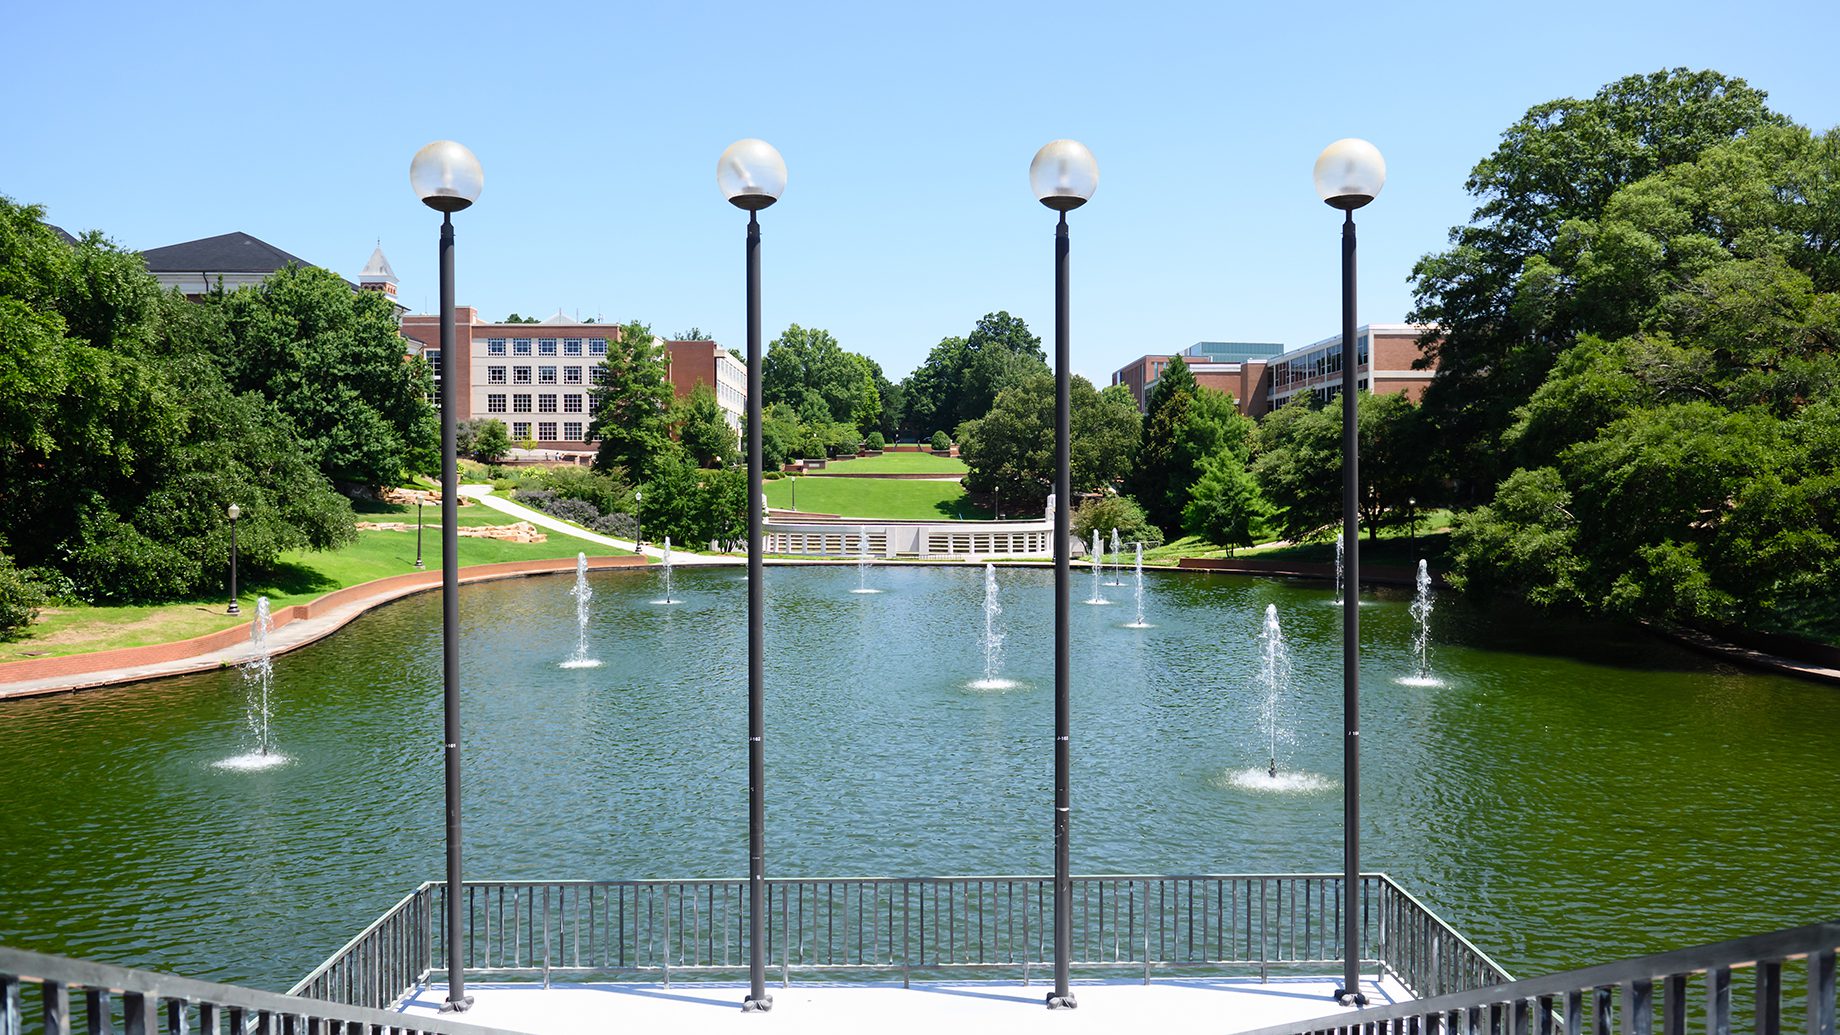 Four lightpoles stand at the bottom of a staircase overlooking the Clemson University reflection pond